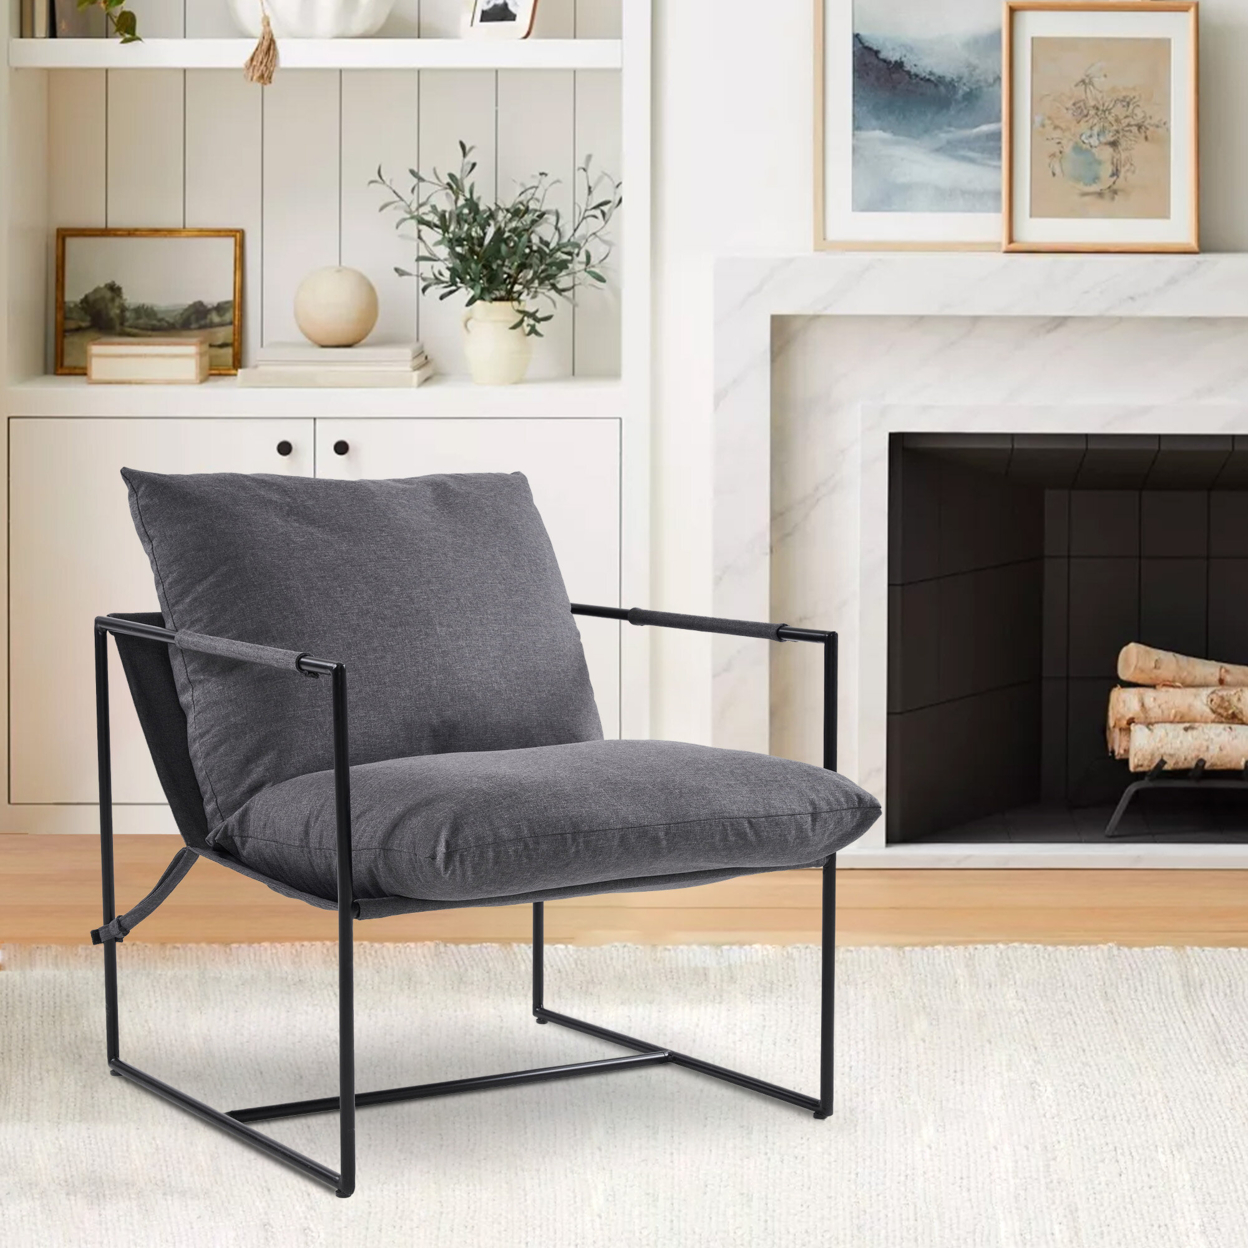 Modern Metal Frame Sling Back Accent Chair With Loose Cushions - Stylish Lounge Chair For Living Room - Dark Gray